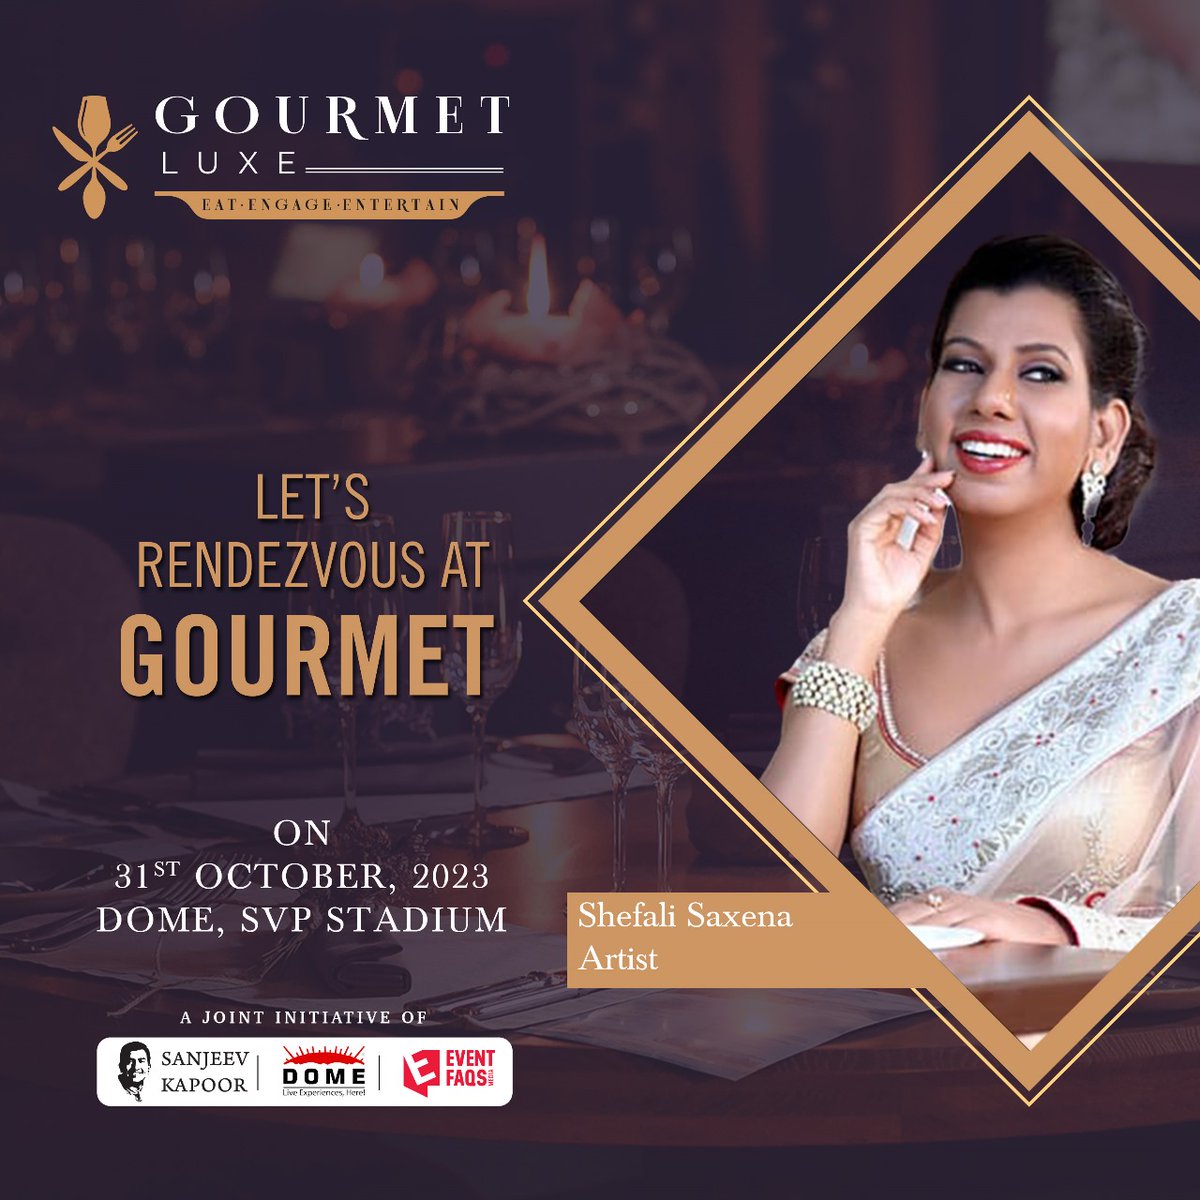 The stage is set, and I'm excited to be a part of Gourmet Luxe! Can't wait to see you there, as we embark on this delightful journey of culinary extravagance and artistic brilliance. See you !! @EVENTFAQS #ShefaliSaxena @GourmetLuxe 
Date: 31st Oct 2023 
Venue: Dome, SVP Stadium